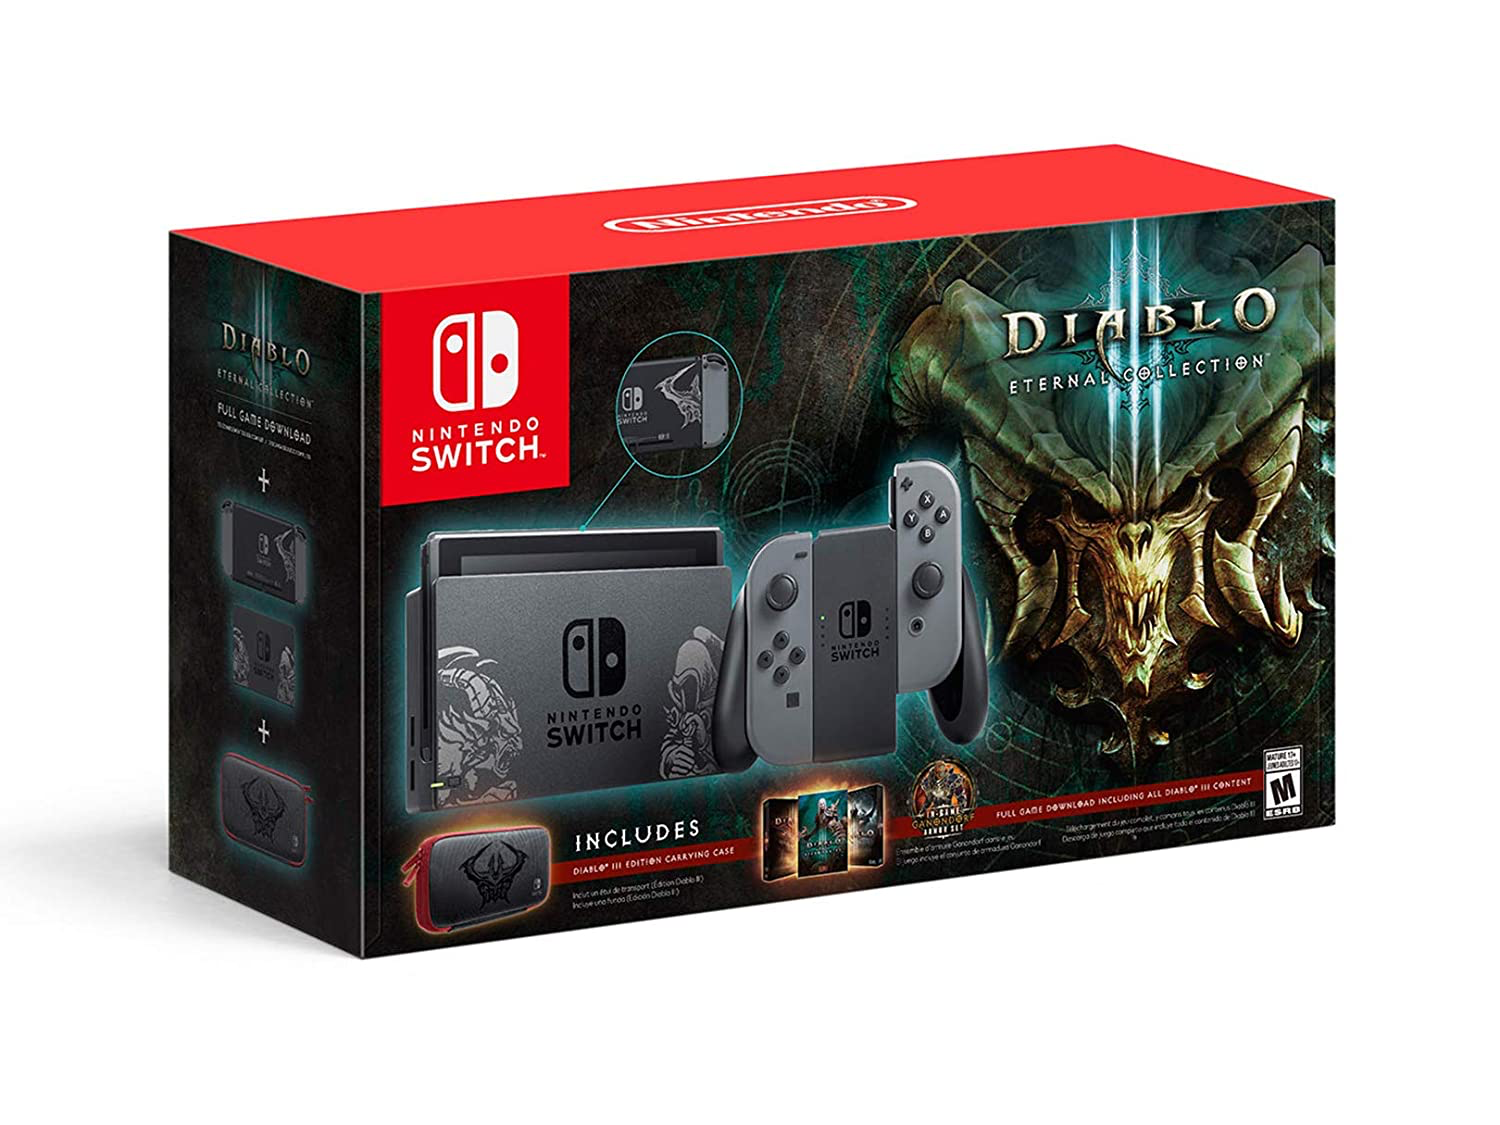 Console System | Diablo 3: Eternal Collection Edition - Switch